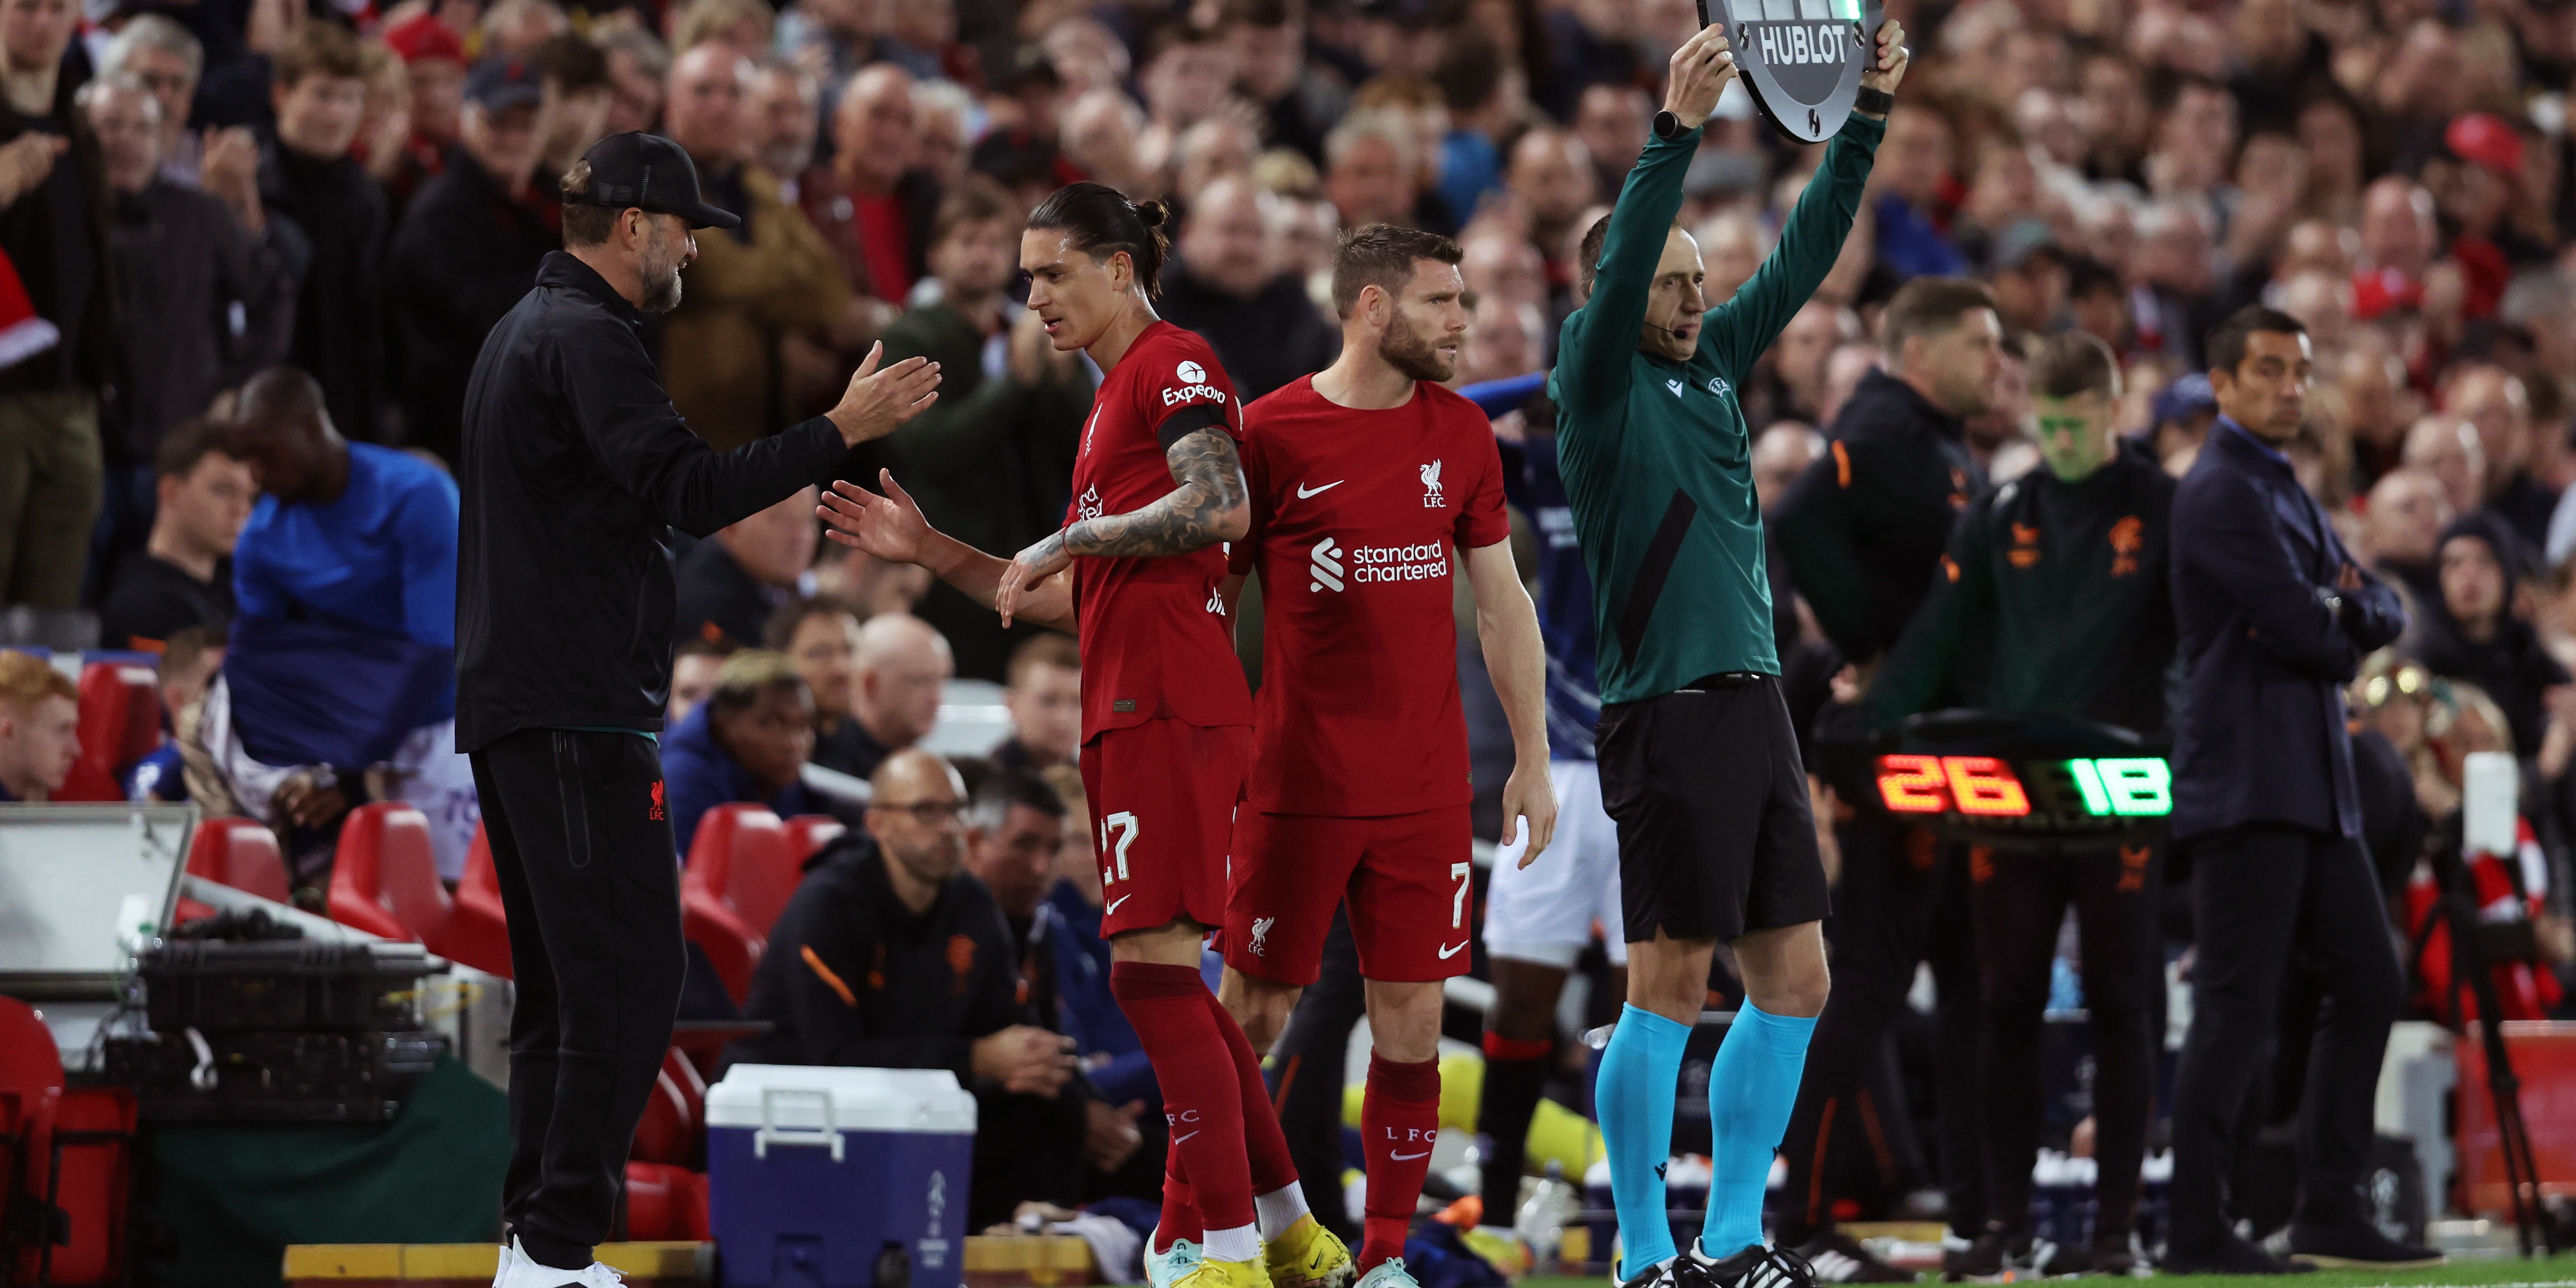 Liverpool star who was ‘in moments unplayable’ v Rangers could start against them